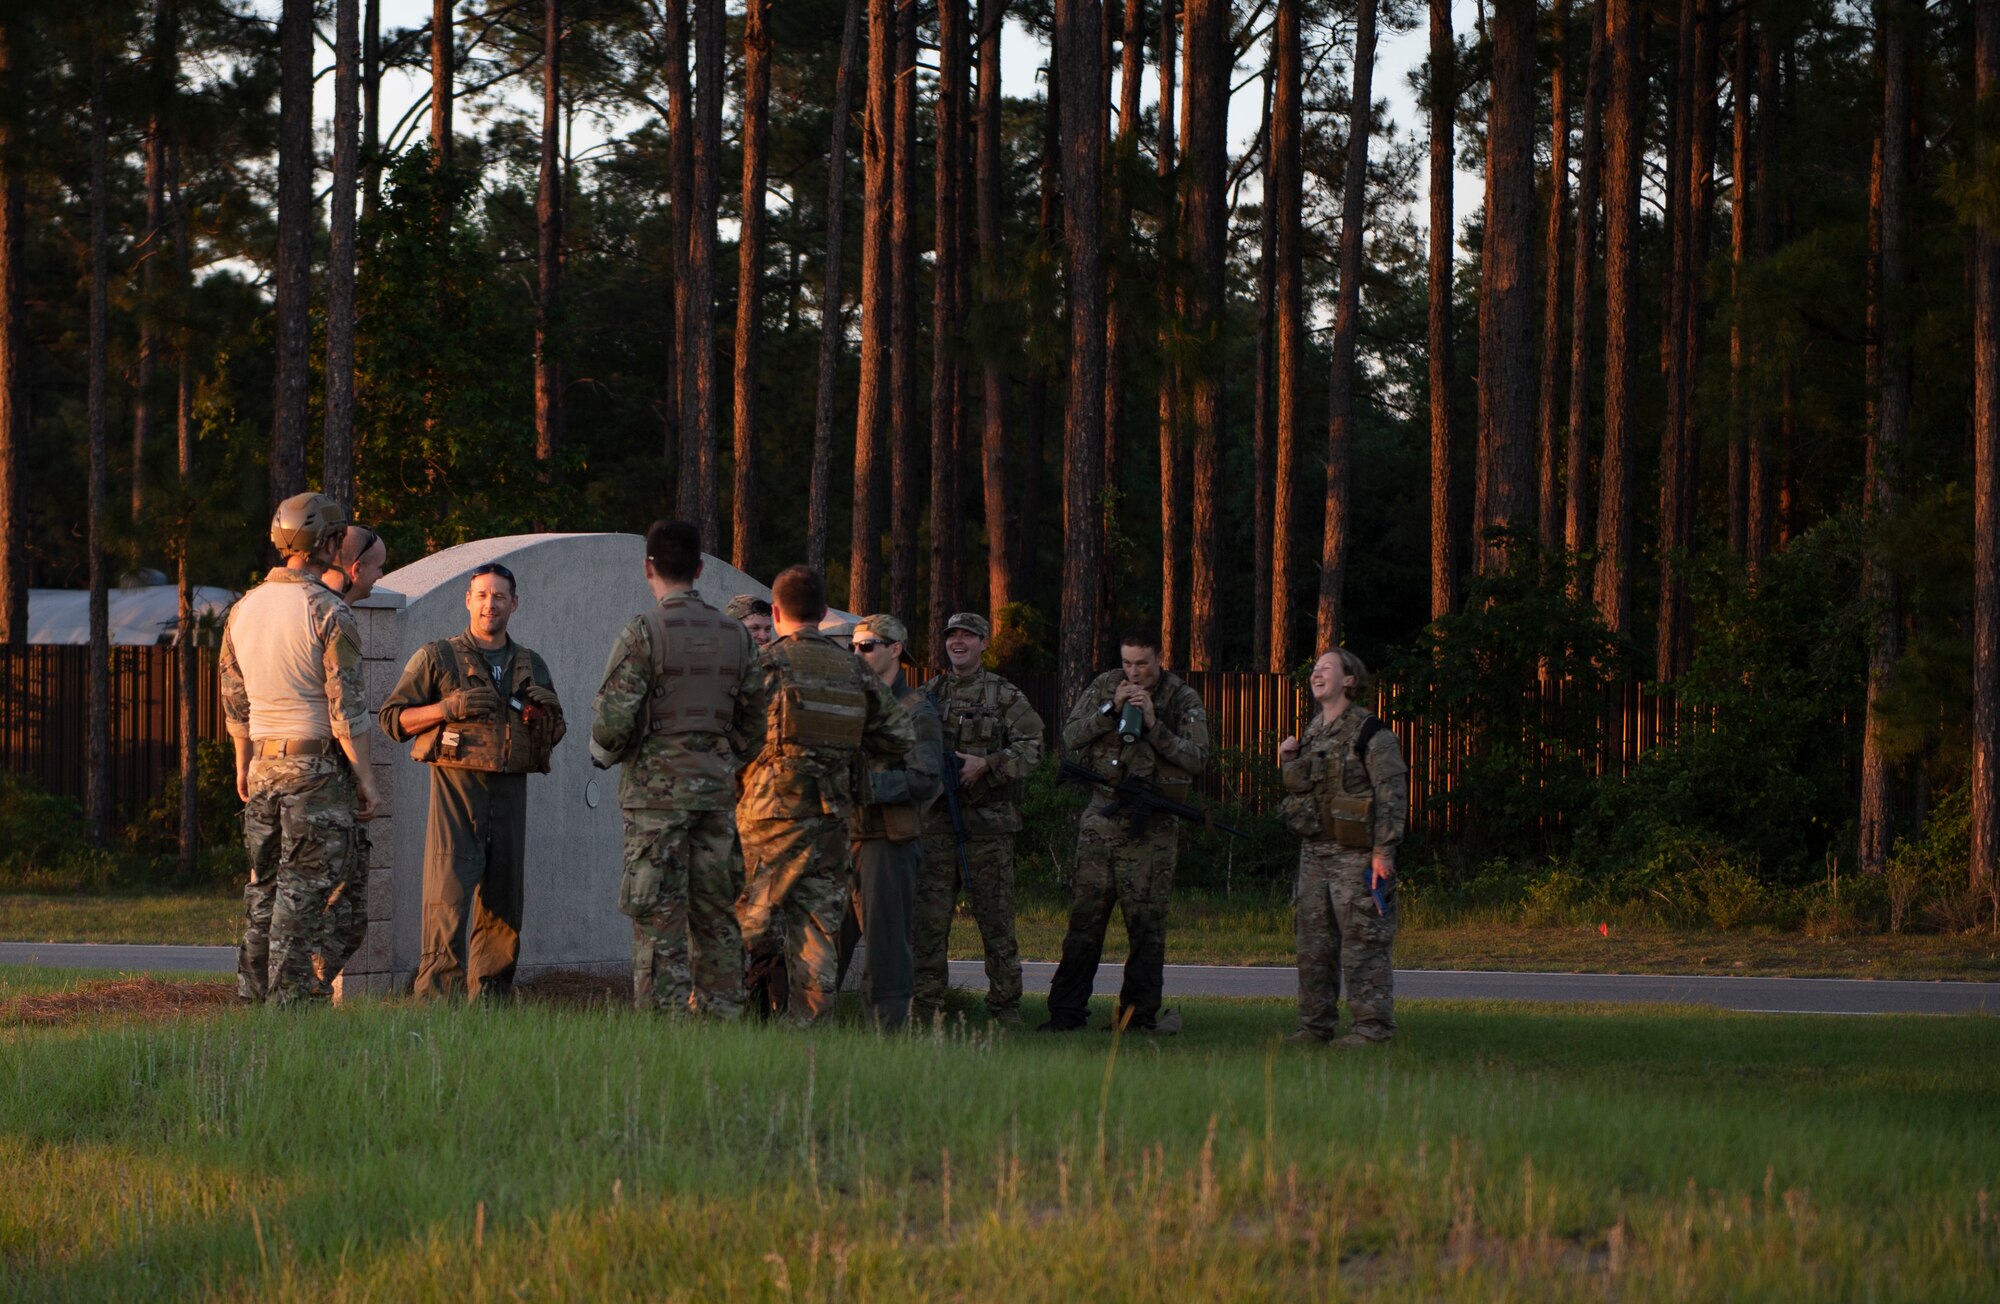 Photo of Airmen talking as a group at the end of their field training.